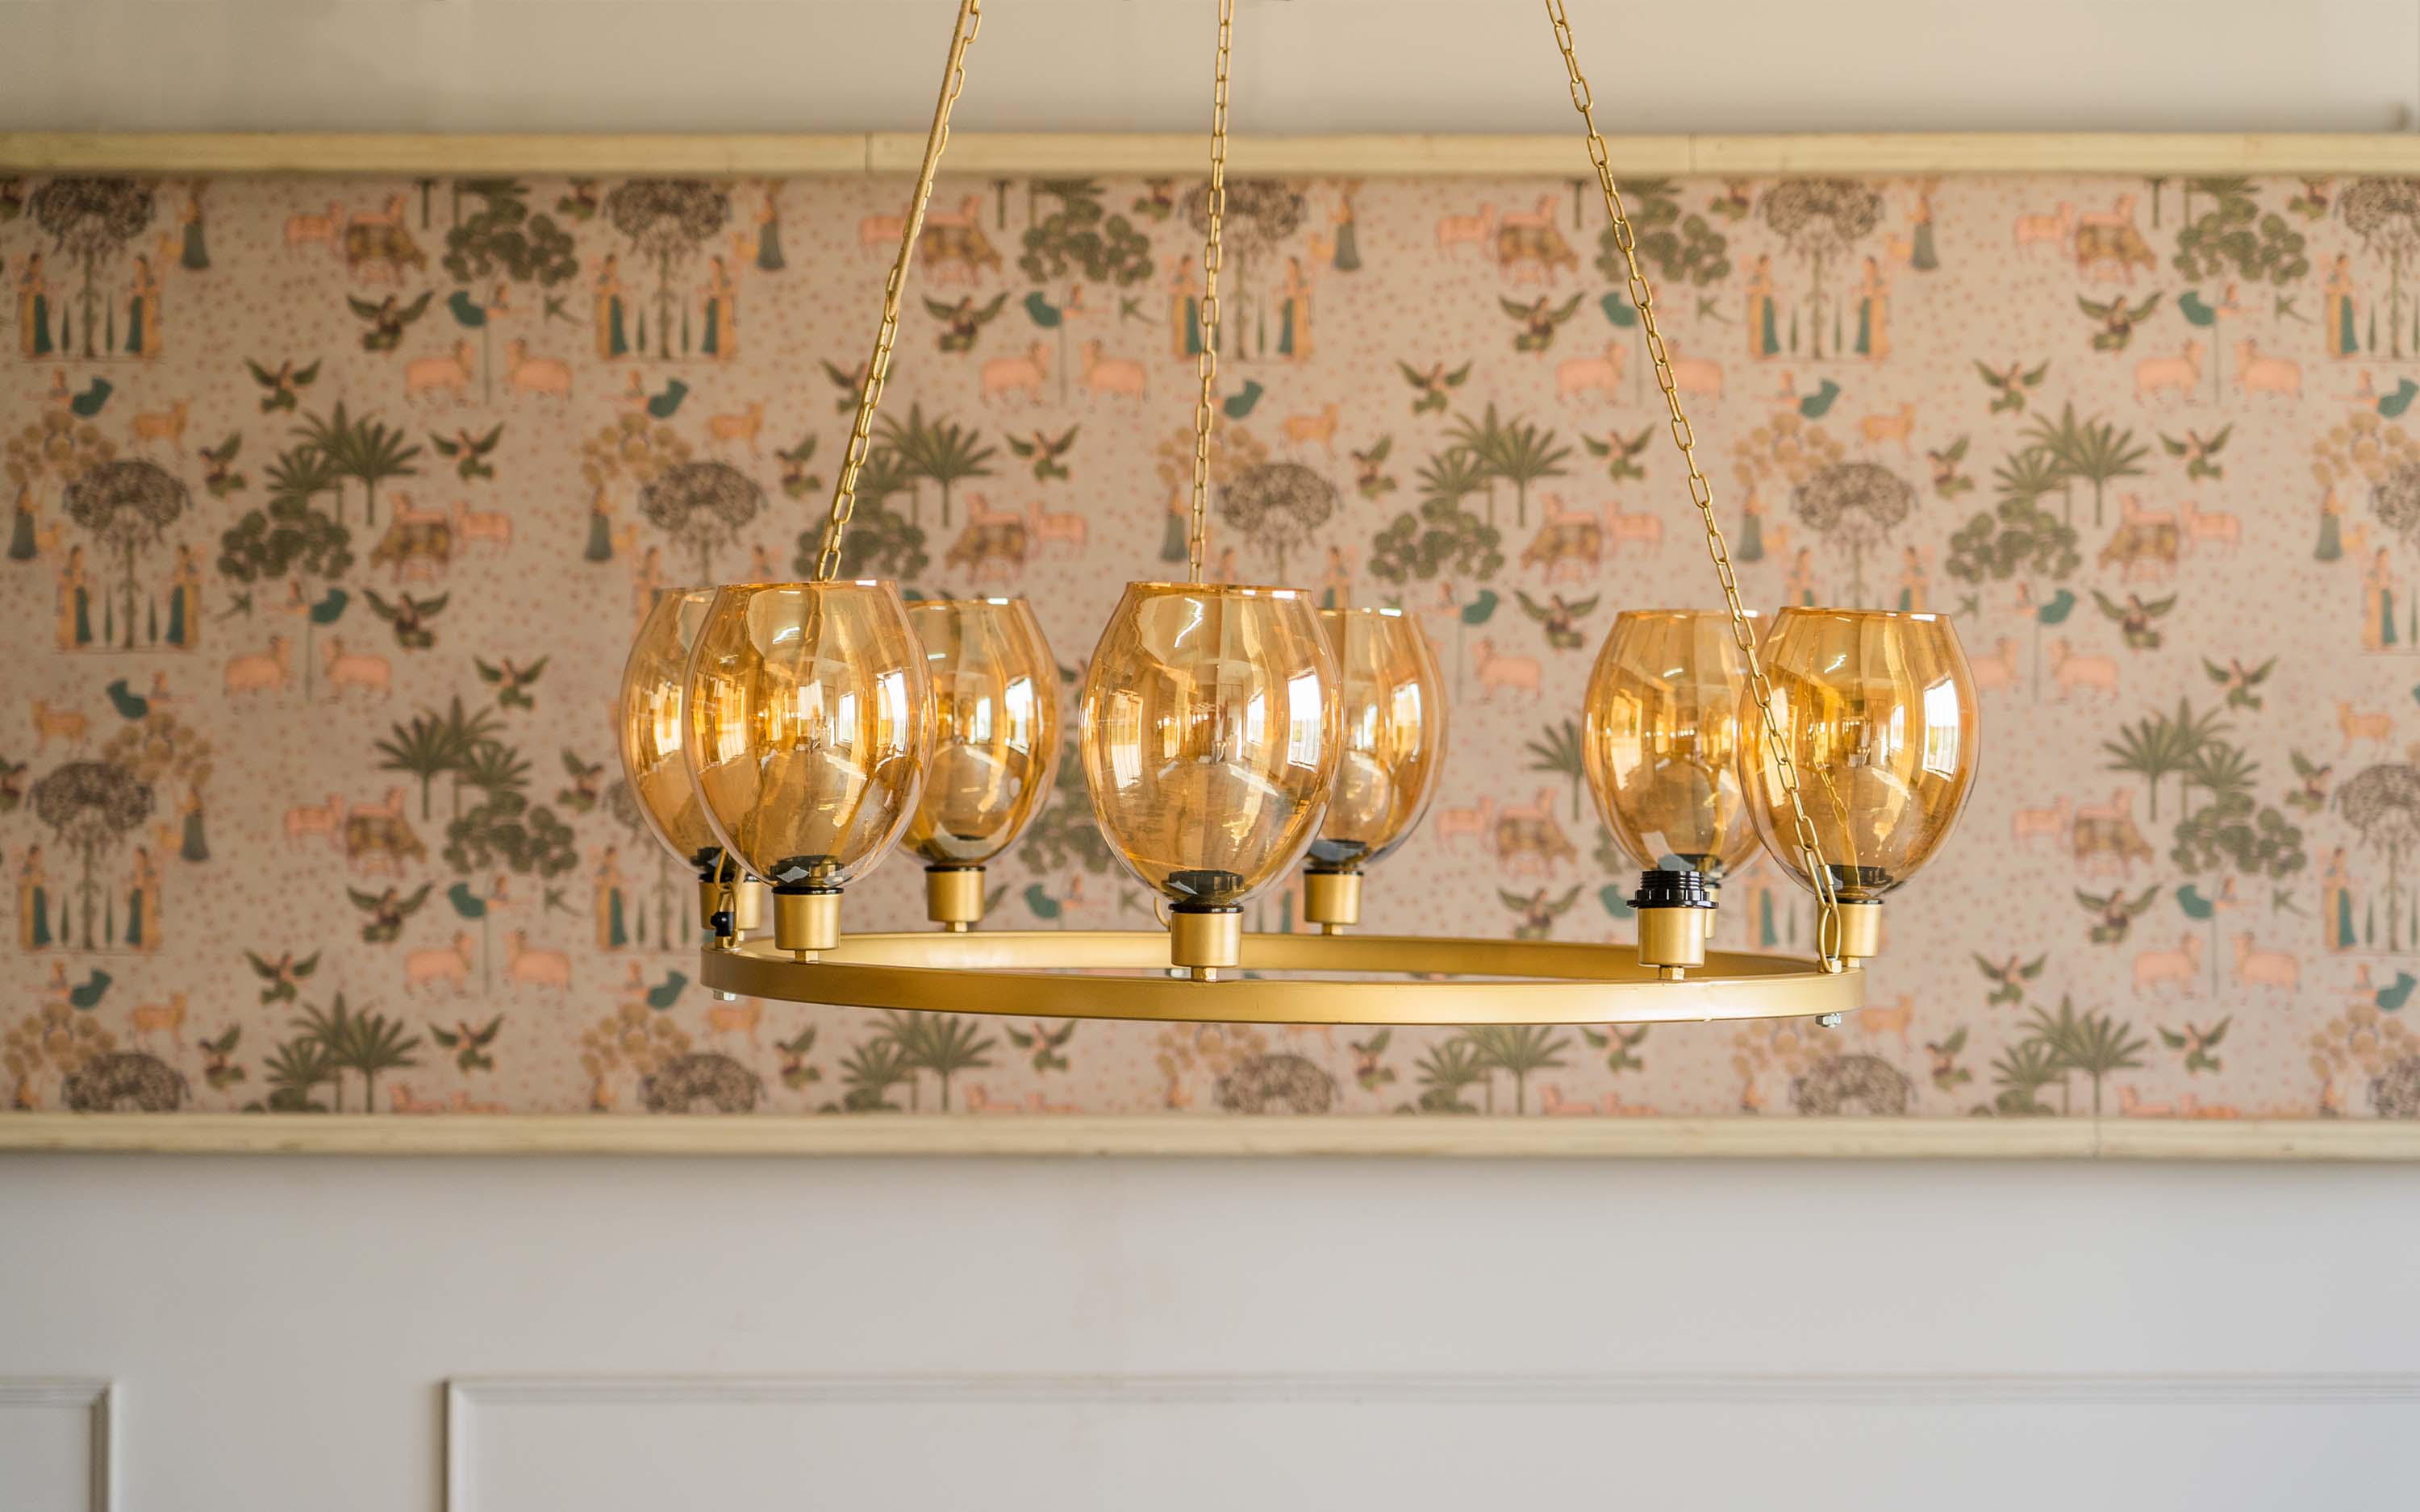 A golden-hued chandelier with multiple glass shades, providing a touch of elegance to living room ceiling lighting